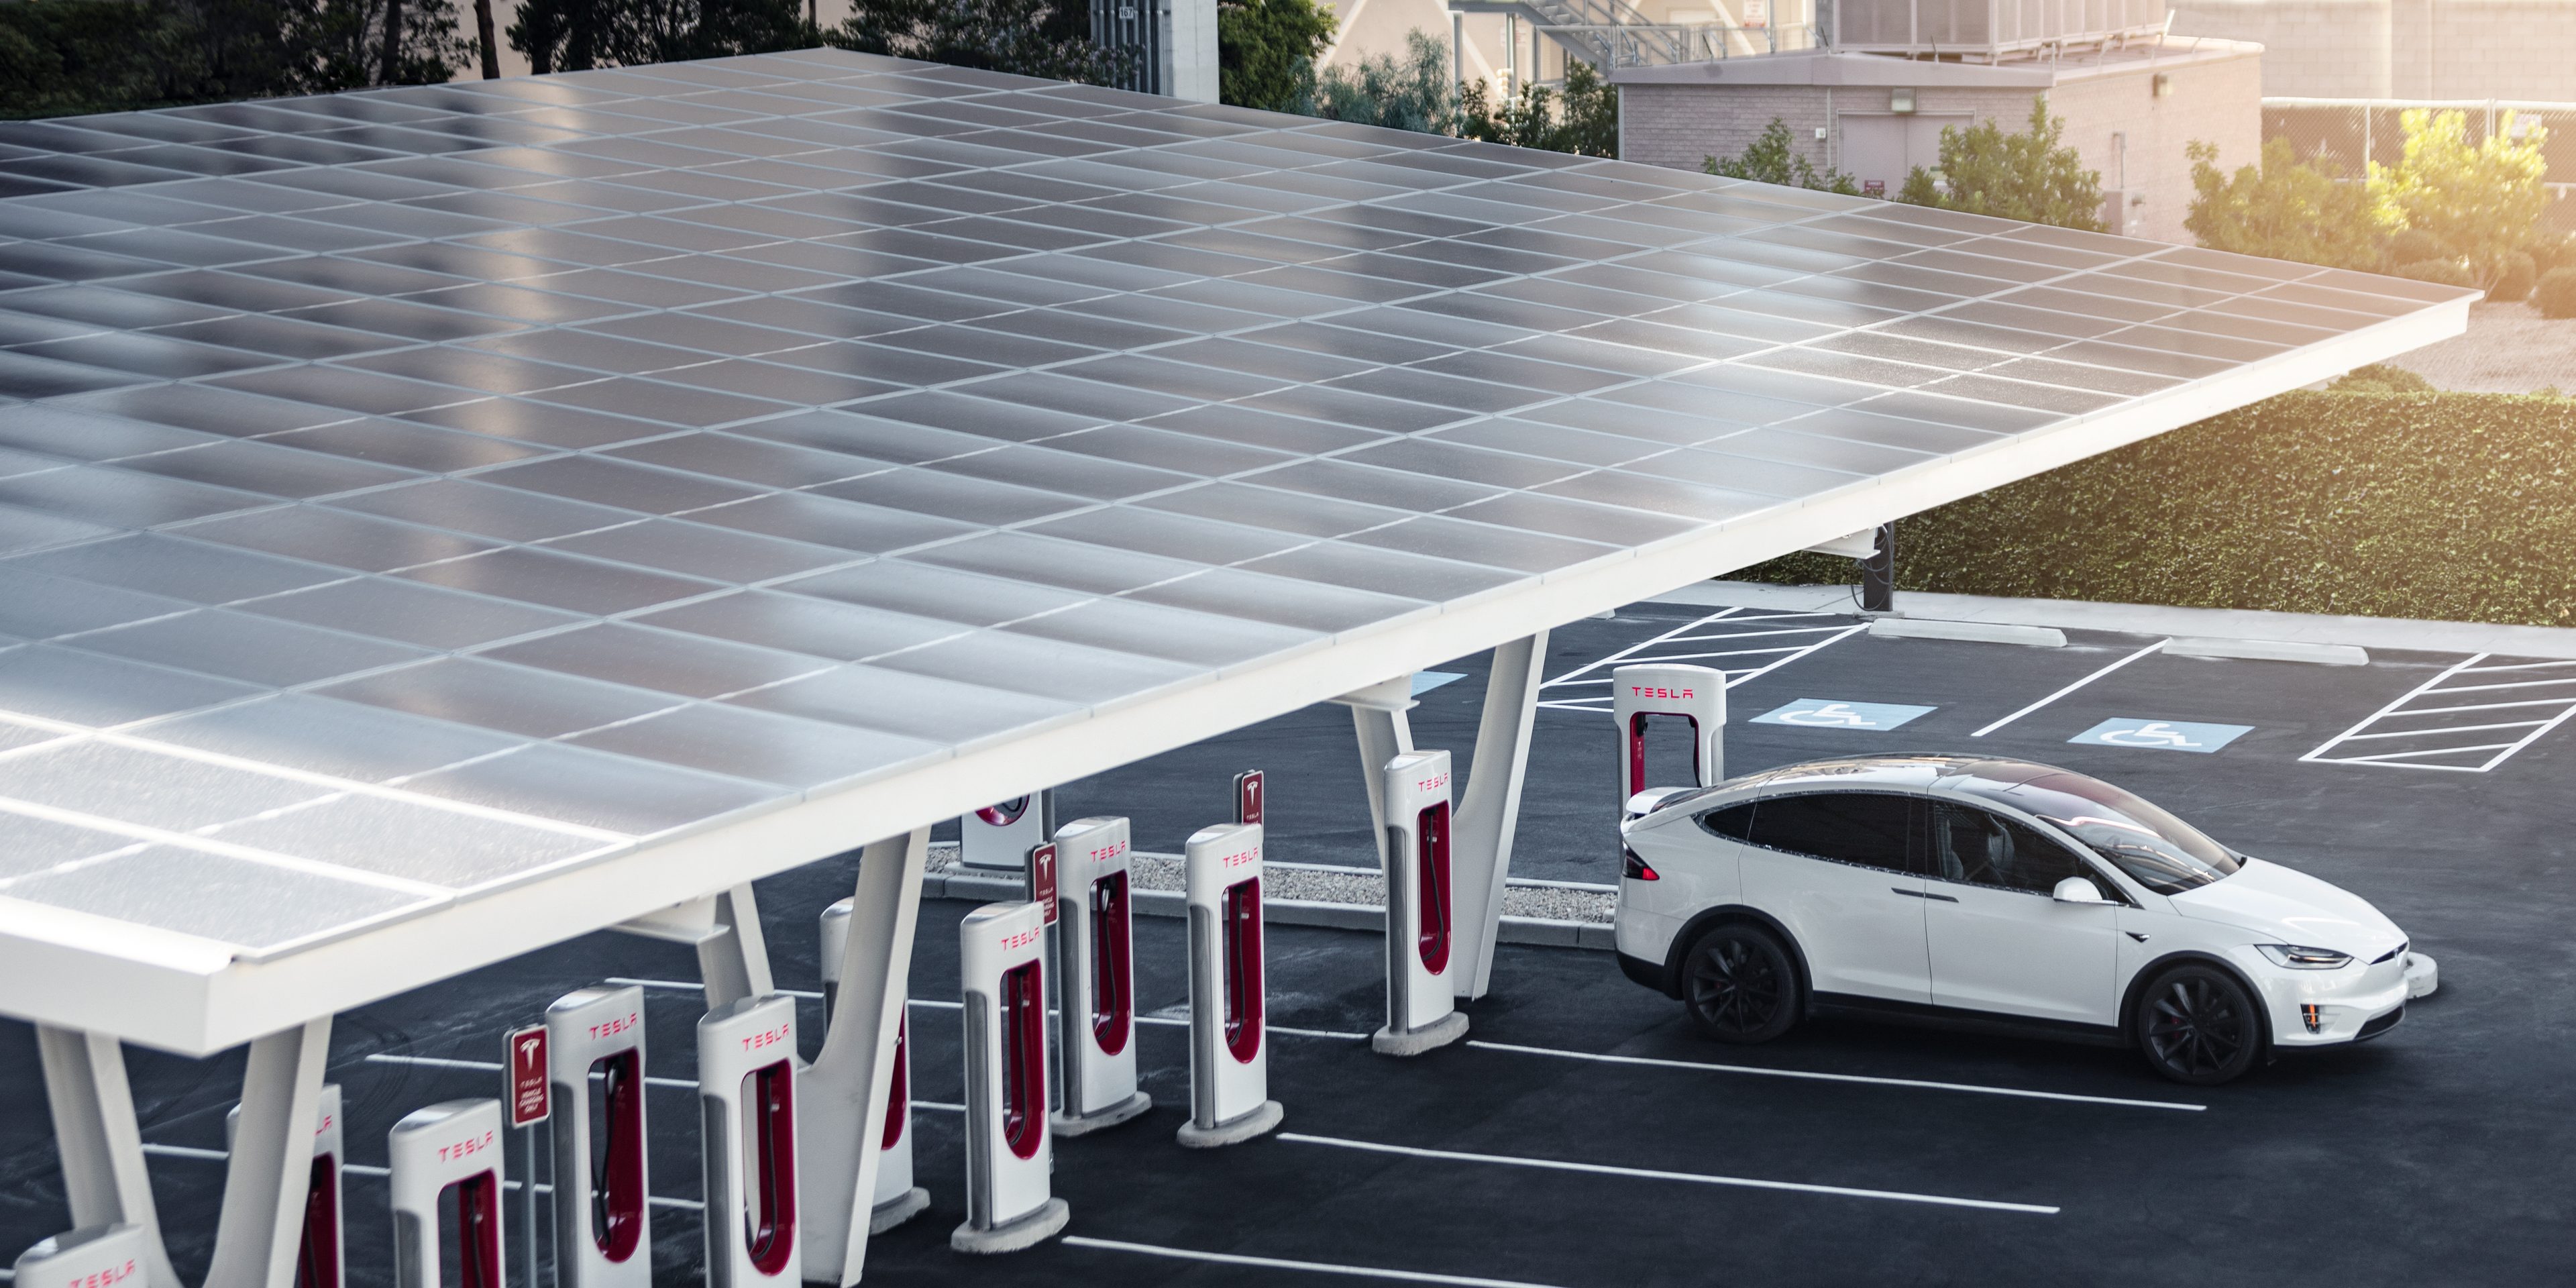 Tesla says it will power all Superchargers with renewable energy this year | Electrek